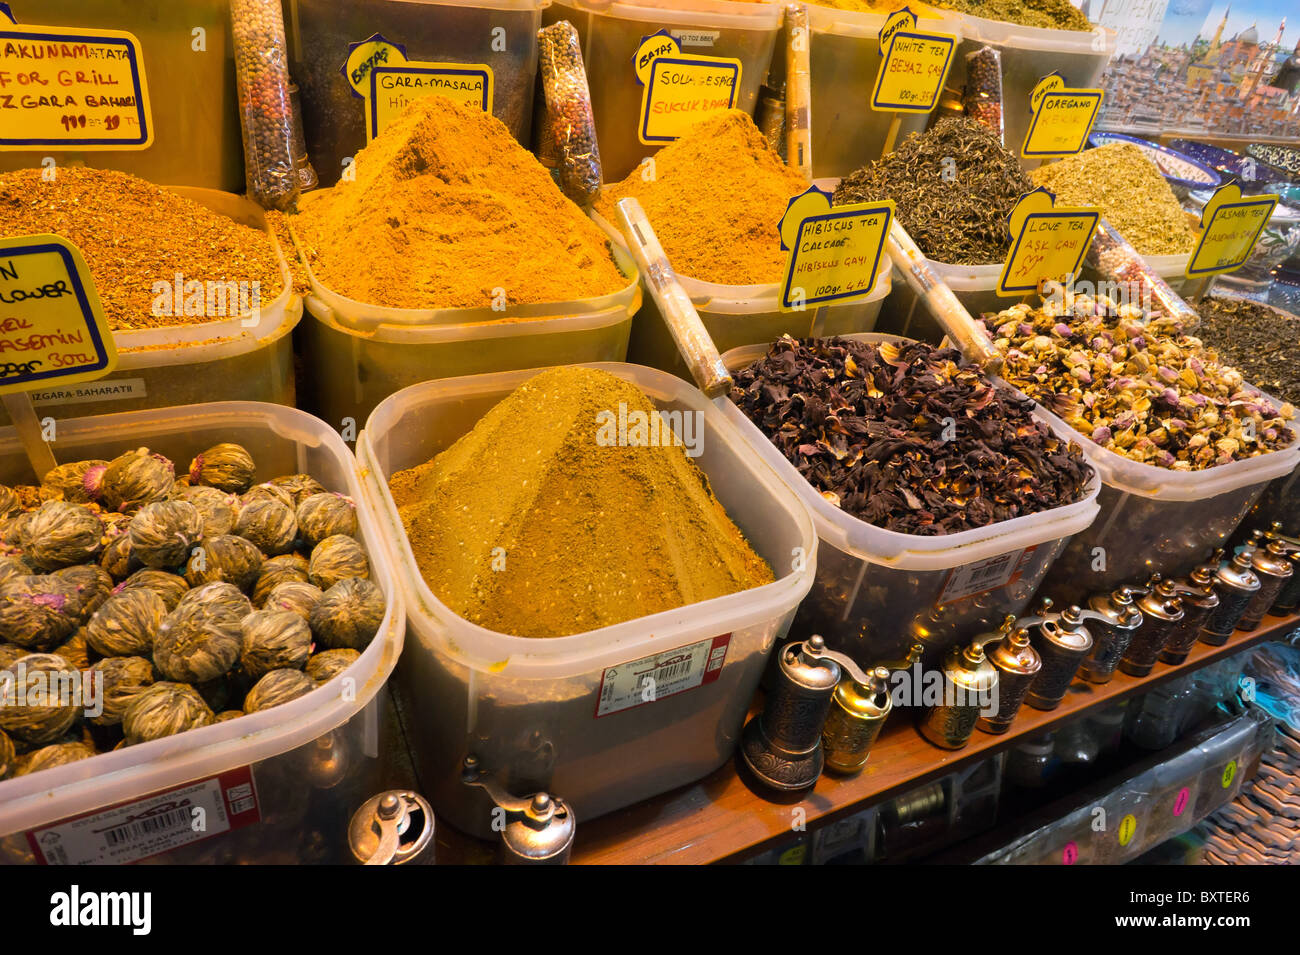 Spices for sale at The Spice bazaar, Istanbul, Turkish. Stock Photo